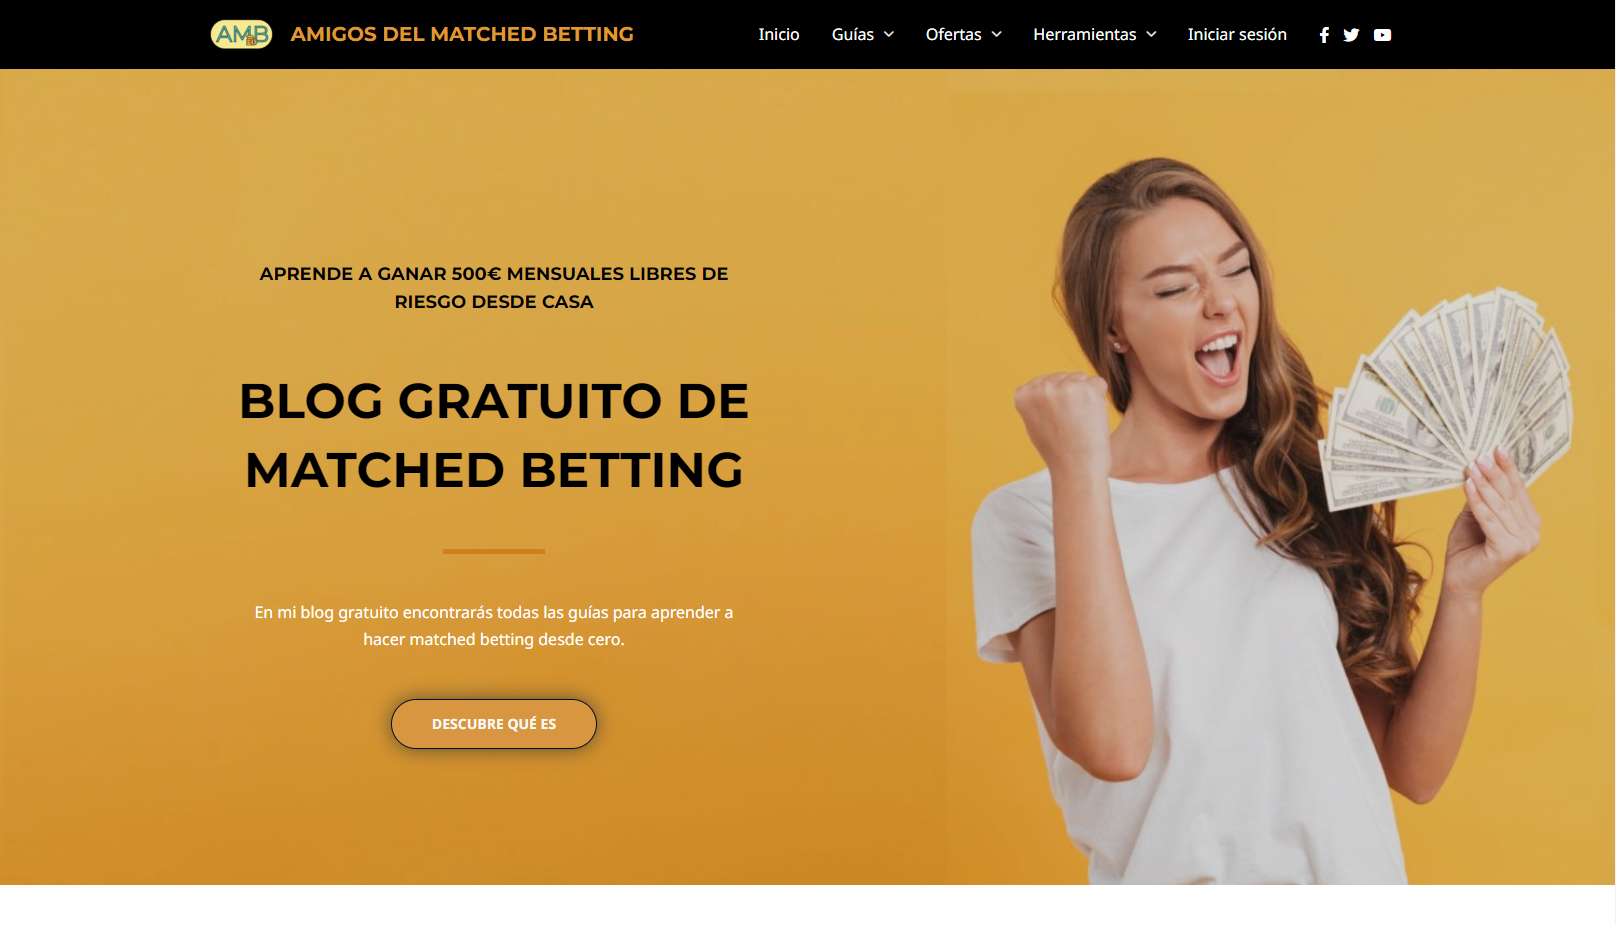 Amigos del Matched Betting